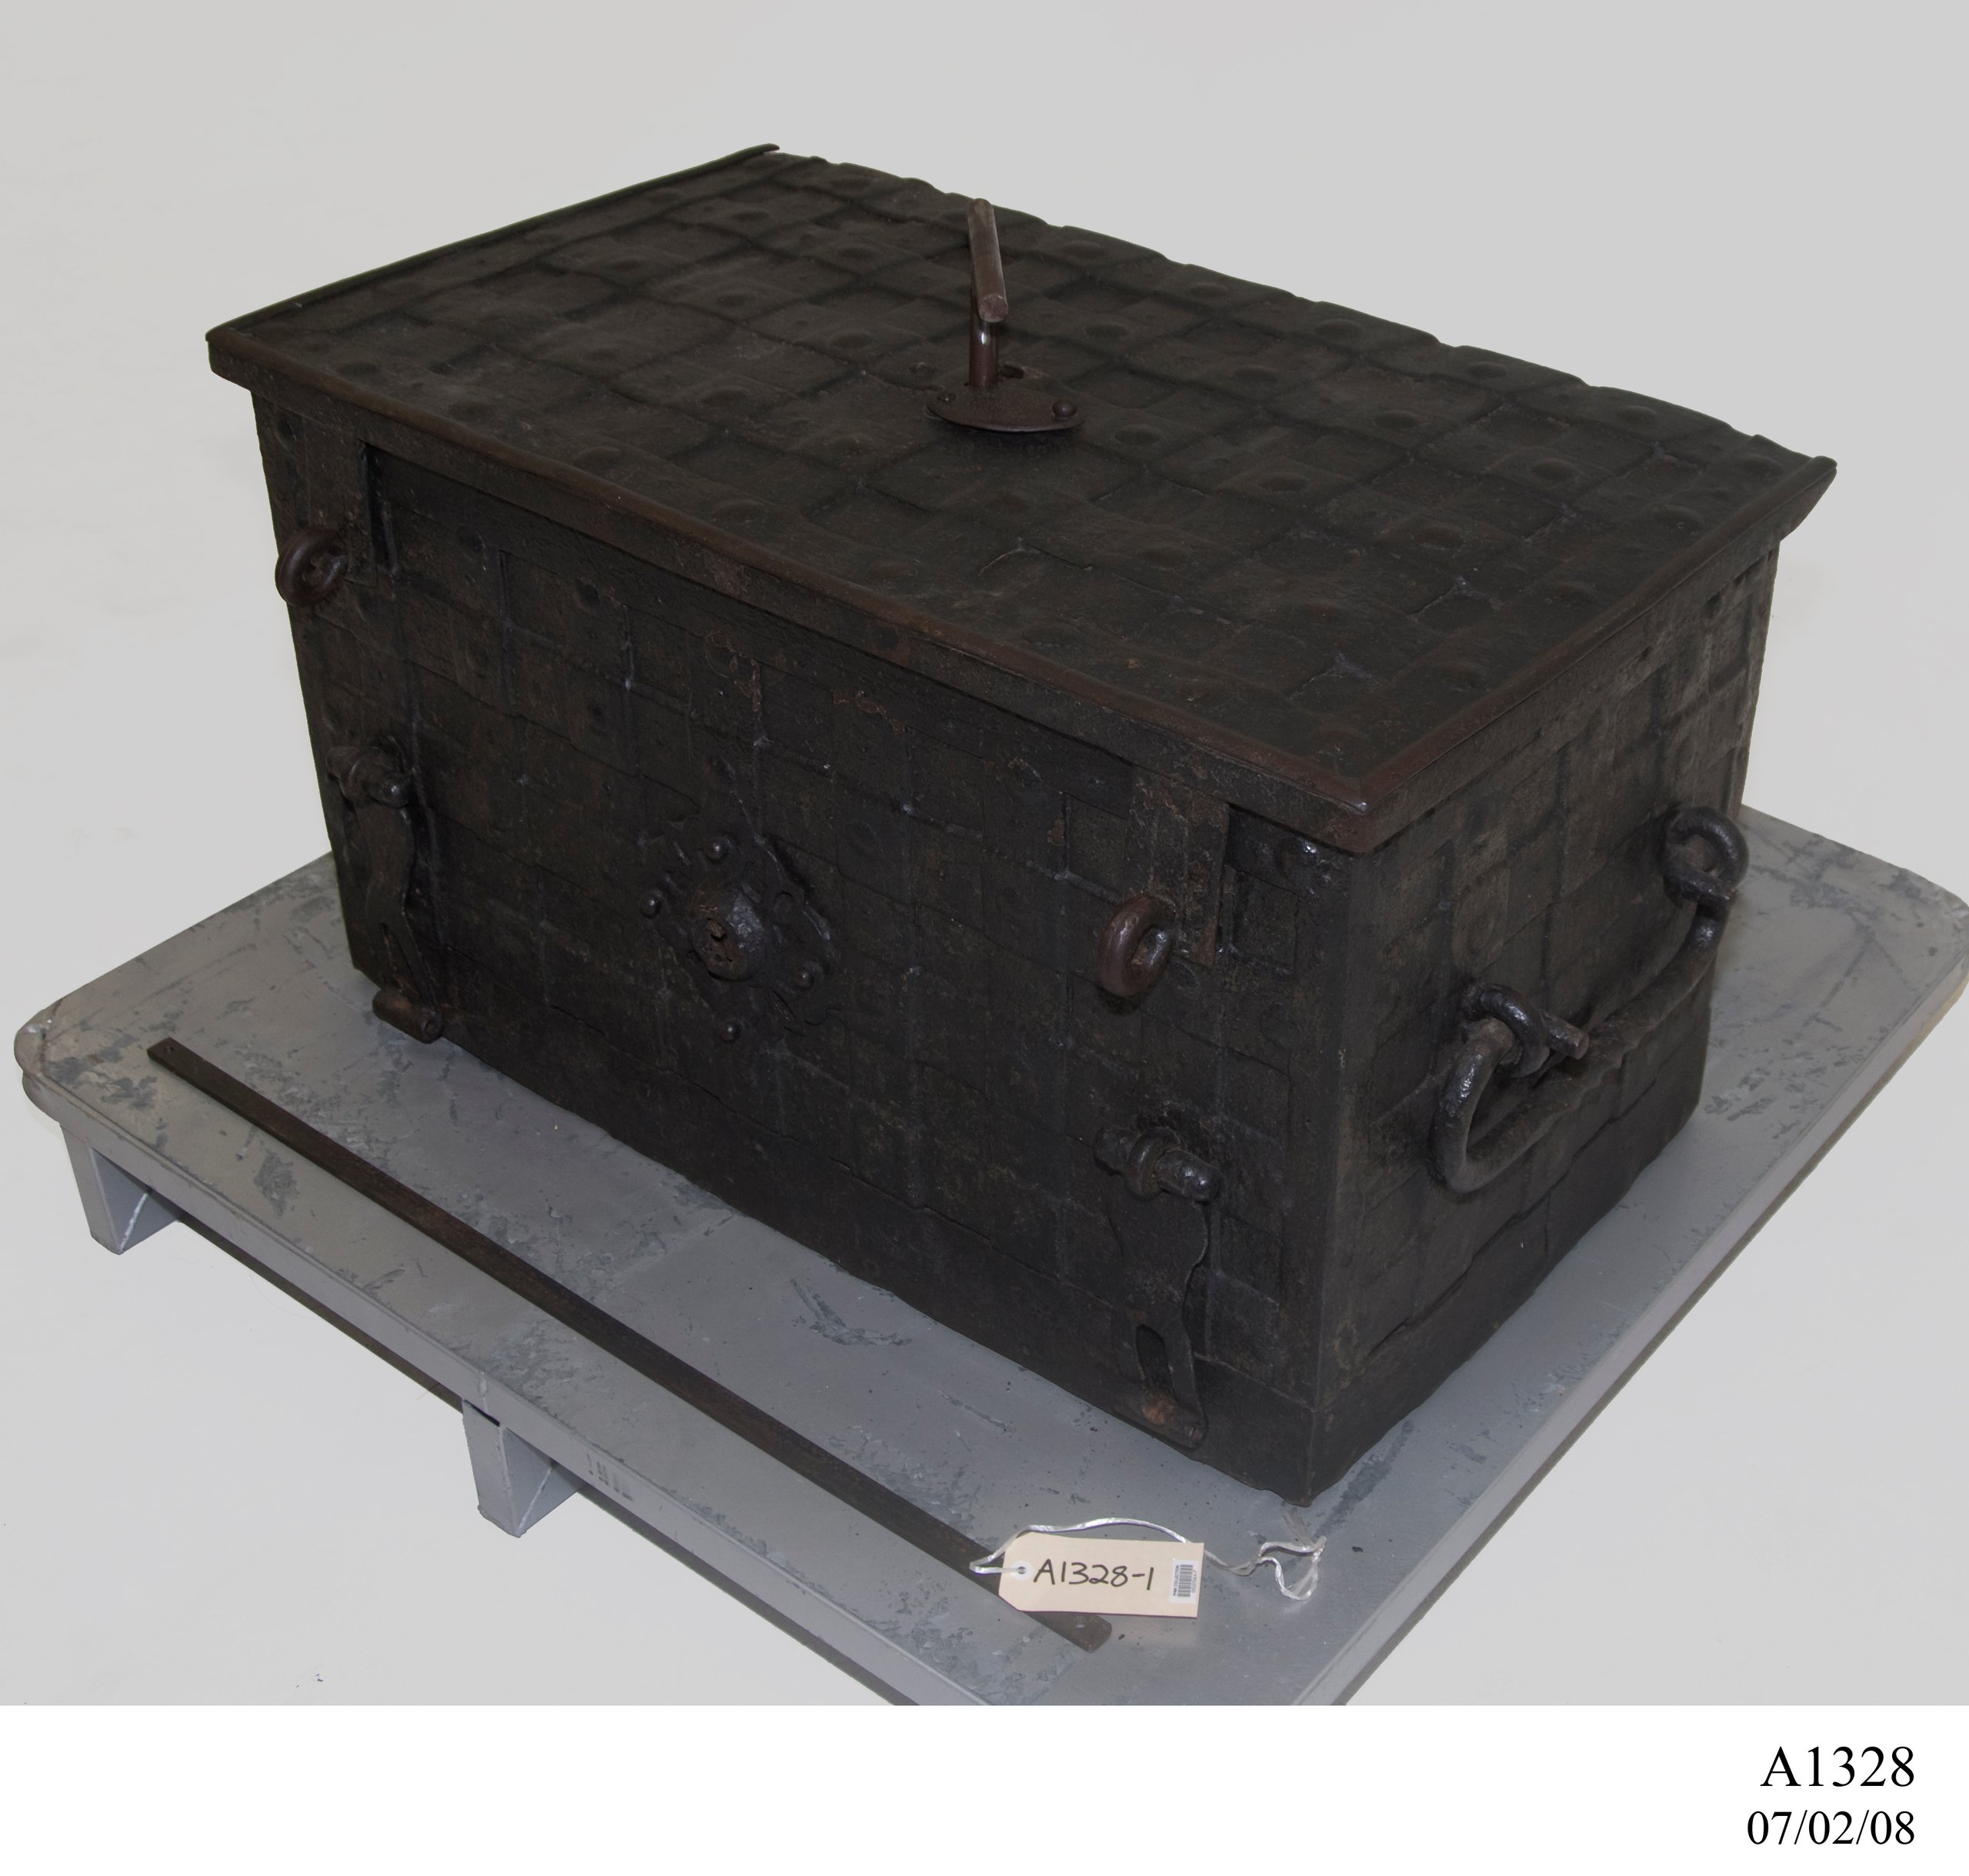 Iron chest owned by explorer Captain William Hovell